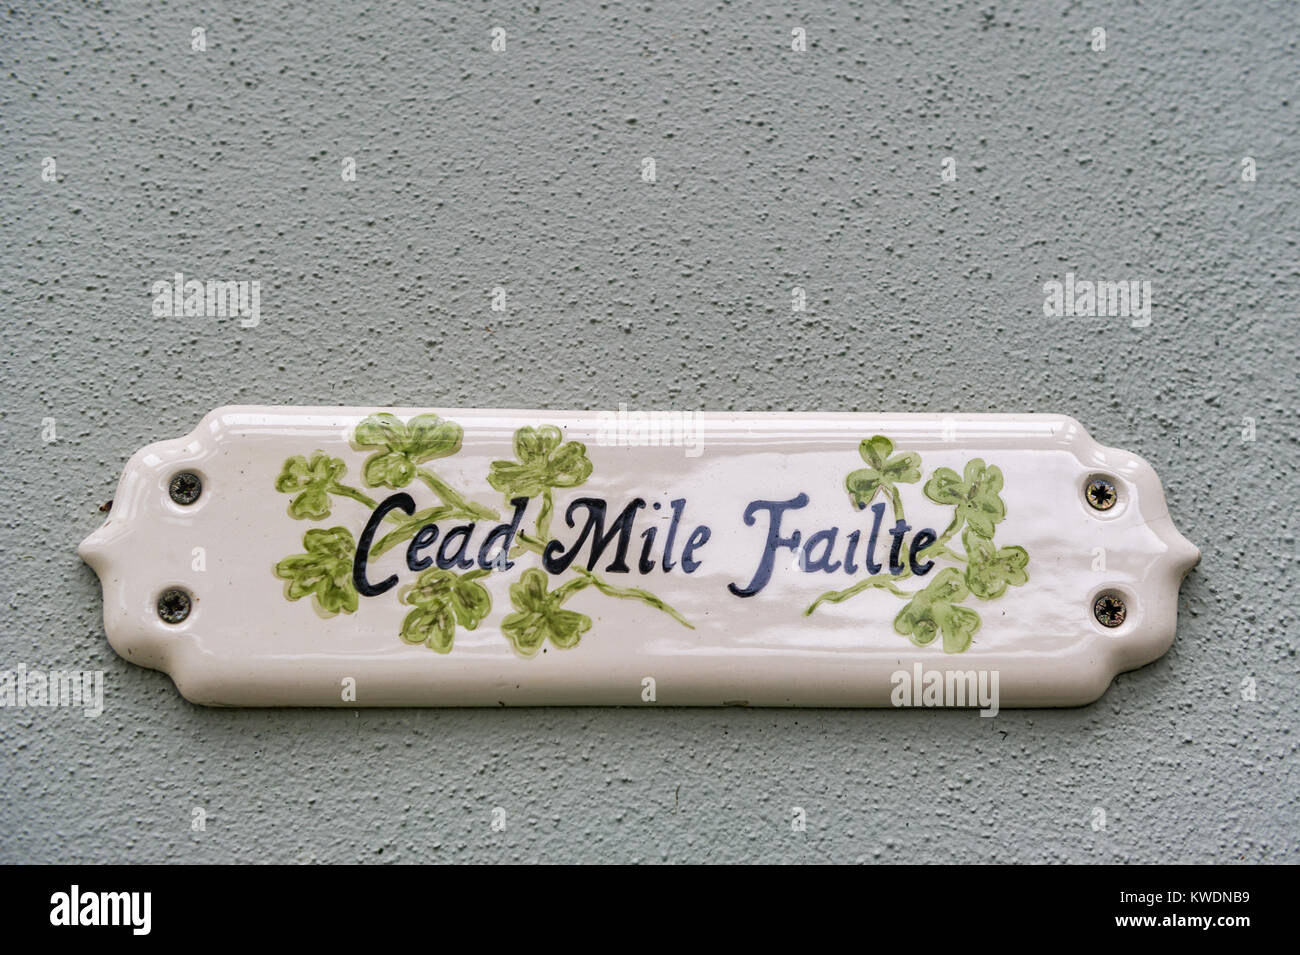 Cead Mile Failte or 100,000 welcomes - a traditional Irish greeting on a ceramic plaque with copy space. Stock Photo